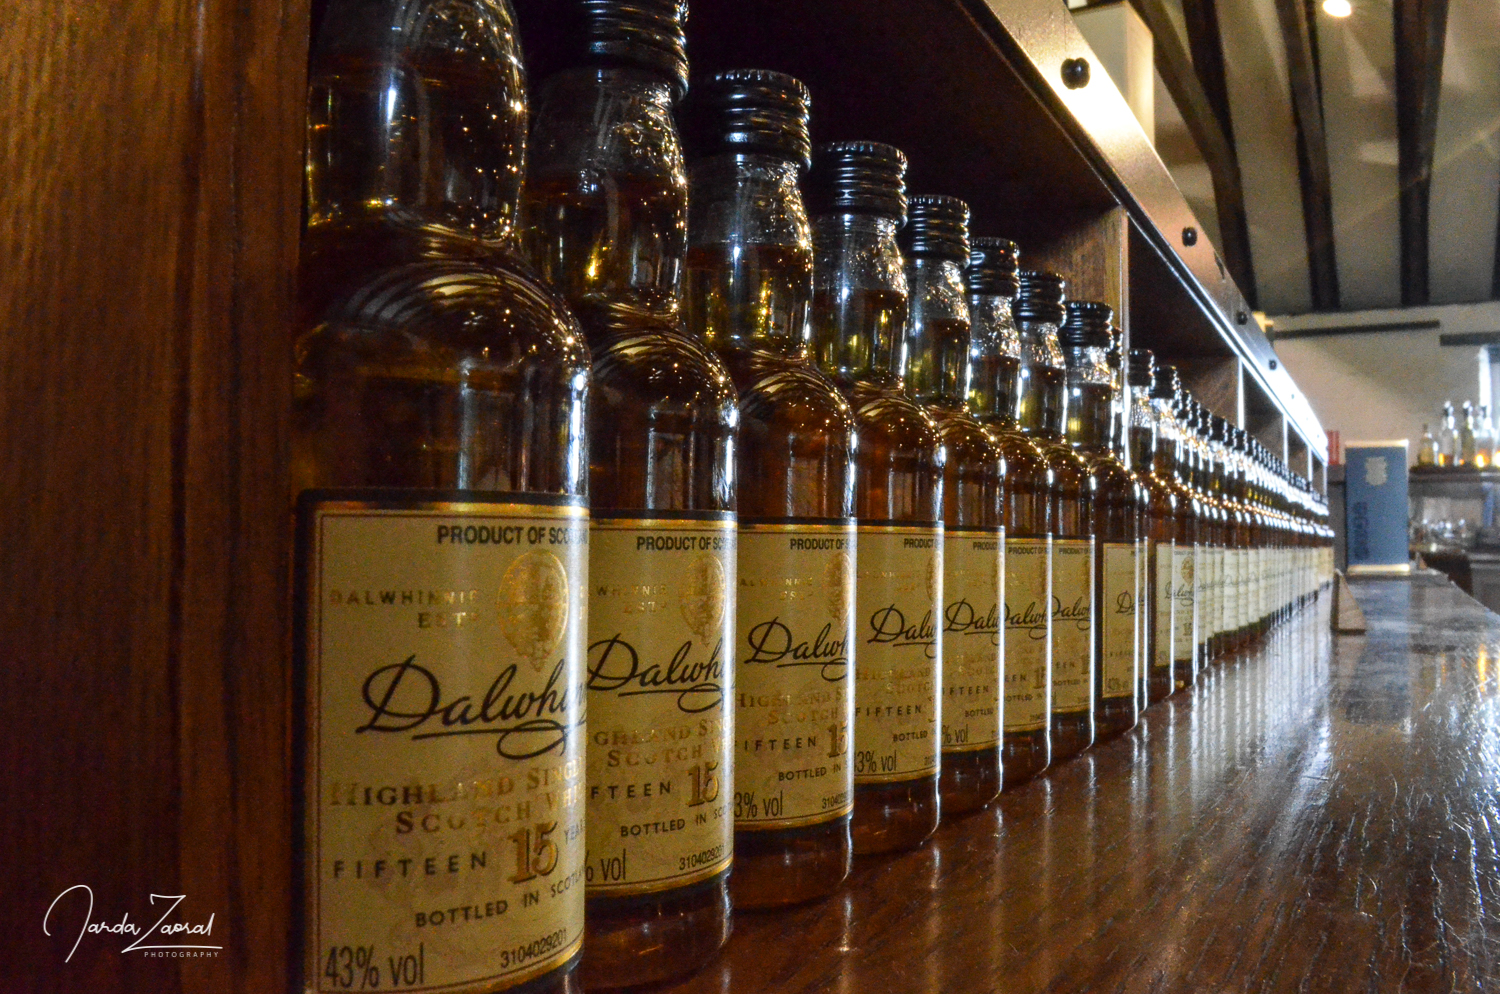 Many Dalwhinnie whisky bottles